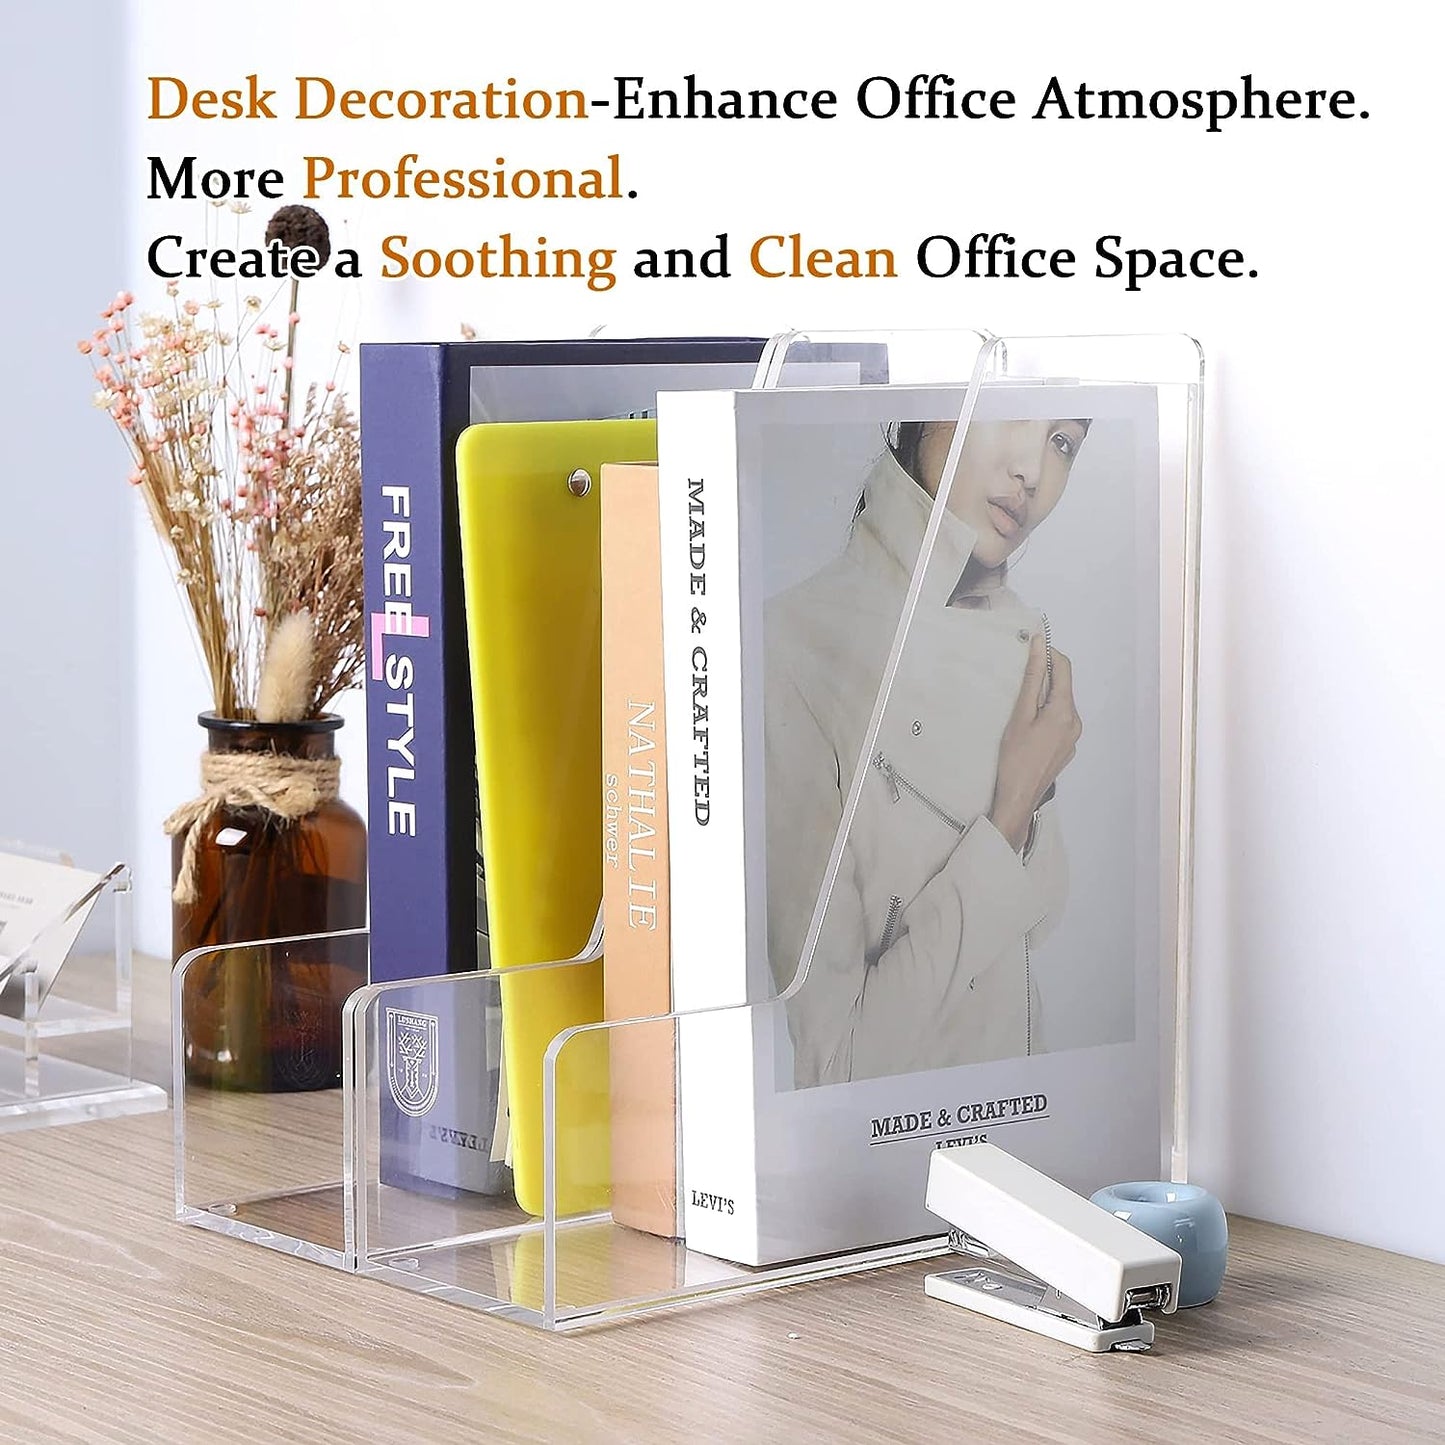 Magazine Holder, Clear Acrylic Desk Organizers, File Organizer for Desk, Magazine Rack- Desktop Book Storage -Independent Vertical 1 Space-2 Pack